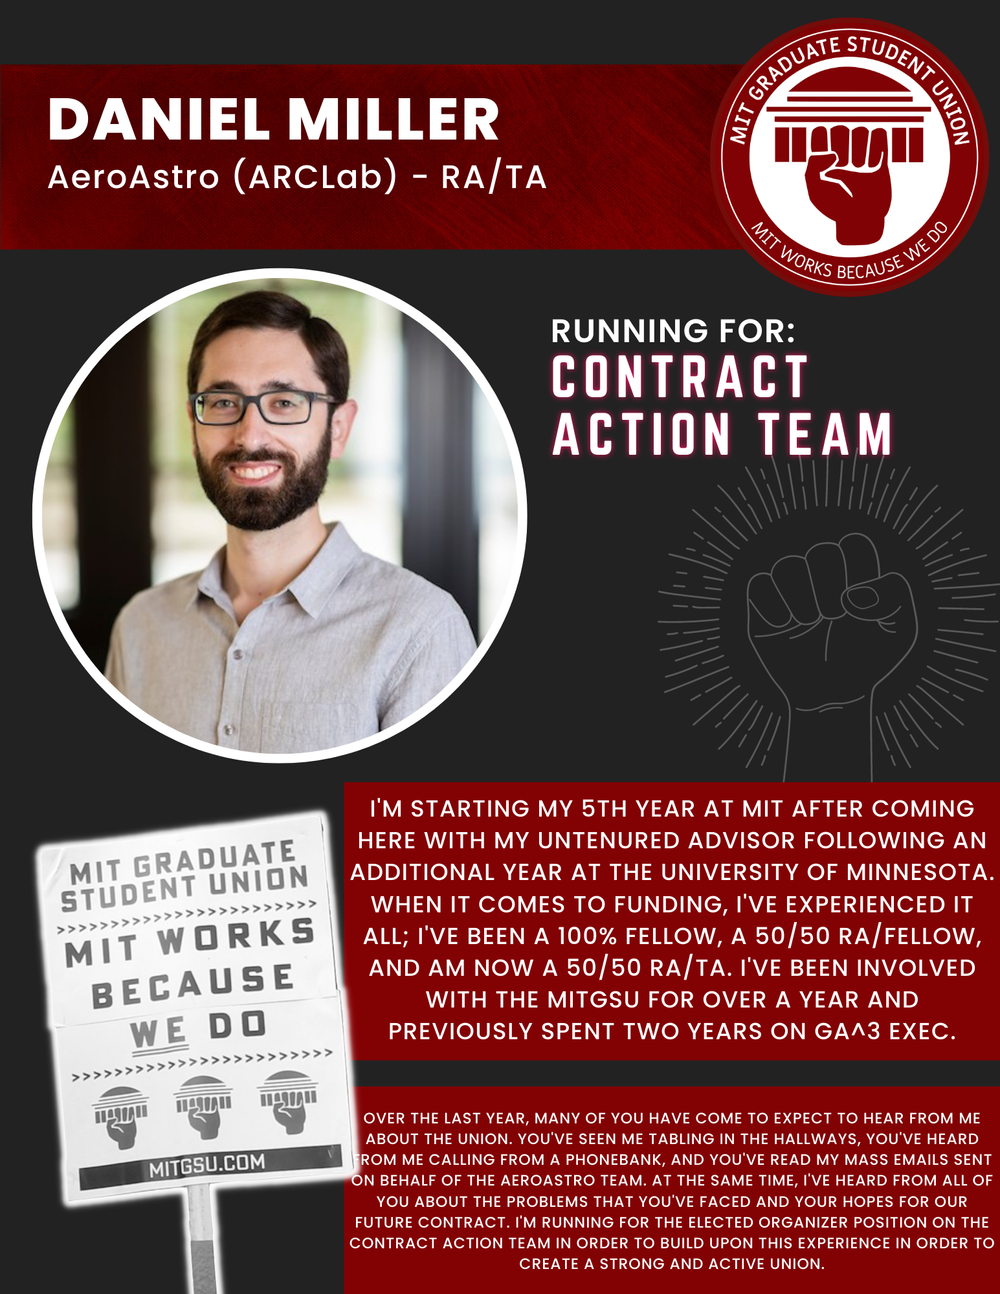  DANIEL MILLER   AeroAstro (ARCLab) - RA/TA   RUNNING FOR: Contract Action Team  I'M STARTING MY 5TH YEAR AT MIT AFTER COMING HERE WITH MY UNTENURED ADVISOR FOLLOWING AN ADDITIONAL YEAR AT THE UNIVERSITY OF MINNESOTA.  WHEN IT COMES TO FUNDING, I'VE 